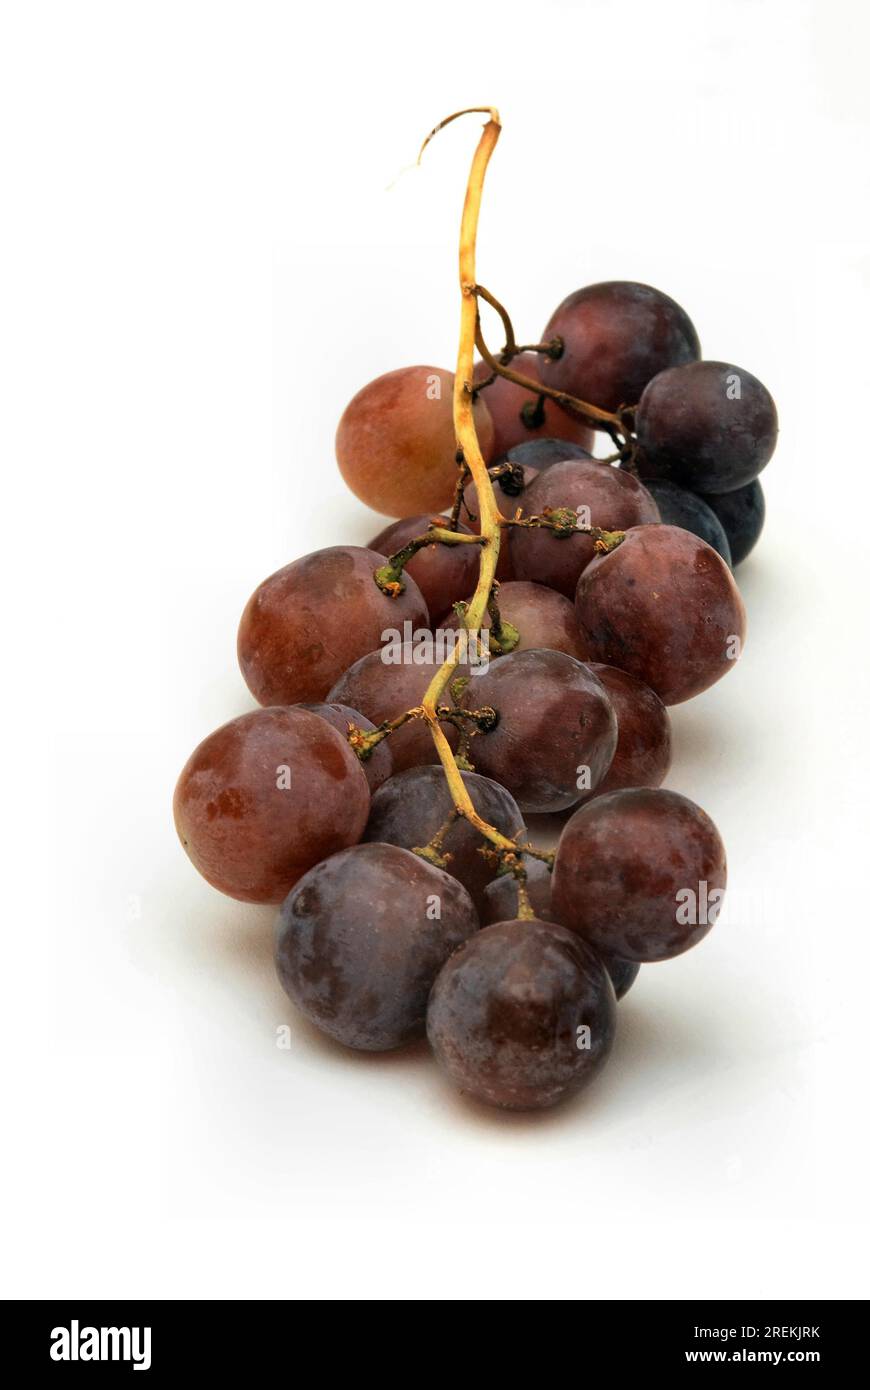 Red grapes exempted Stock Photo